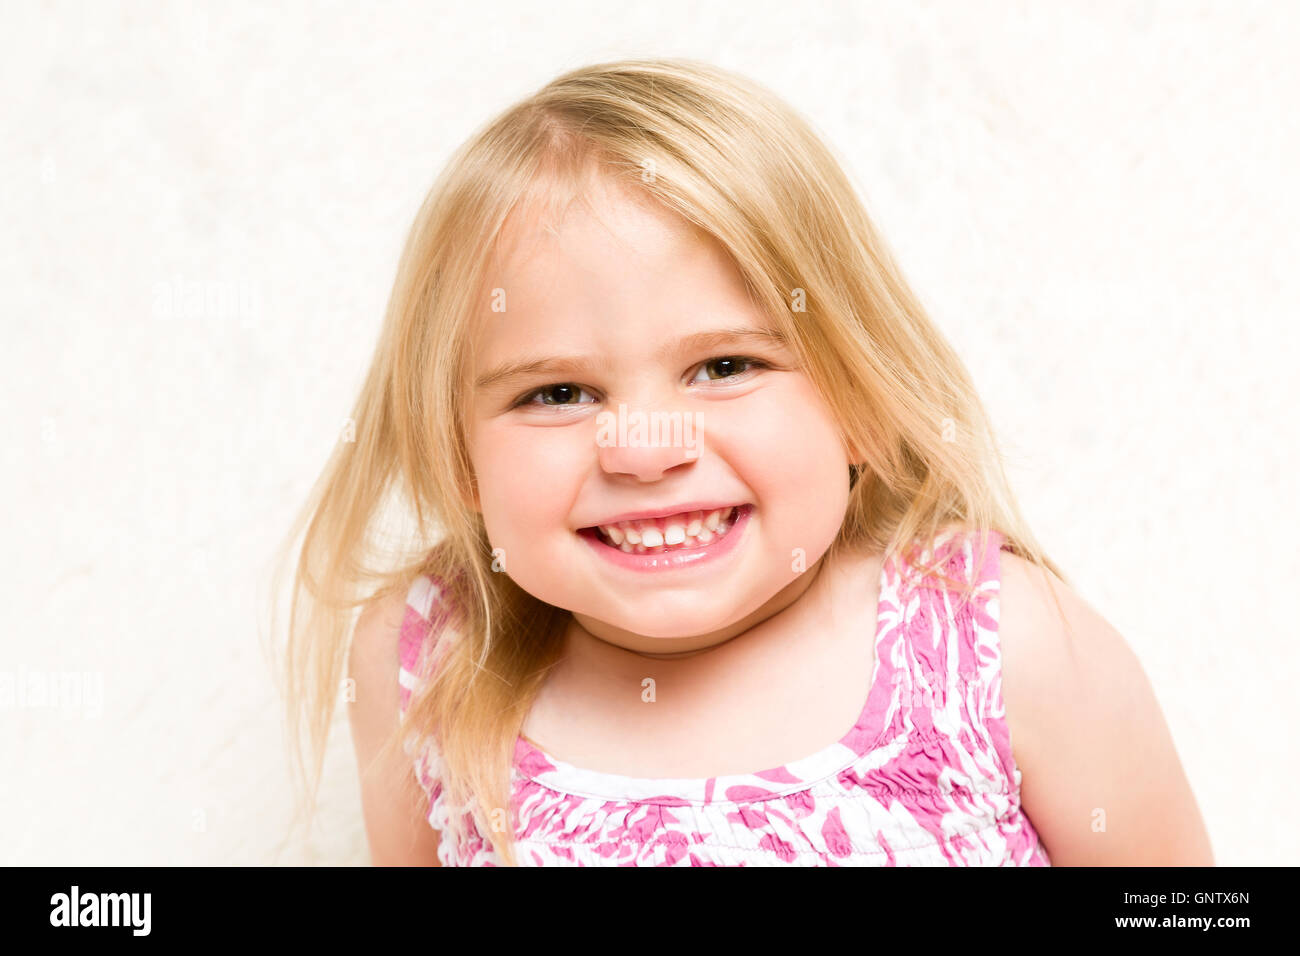 Closeup Portrait of Beautiful Toddler Girl Grinning Cheekily on Neutral Background Stock Photo